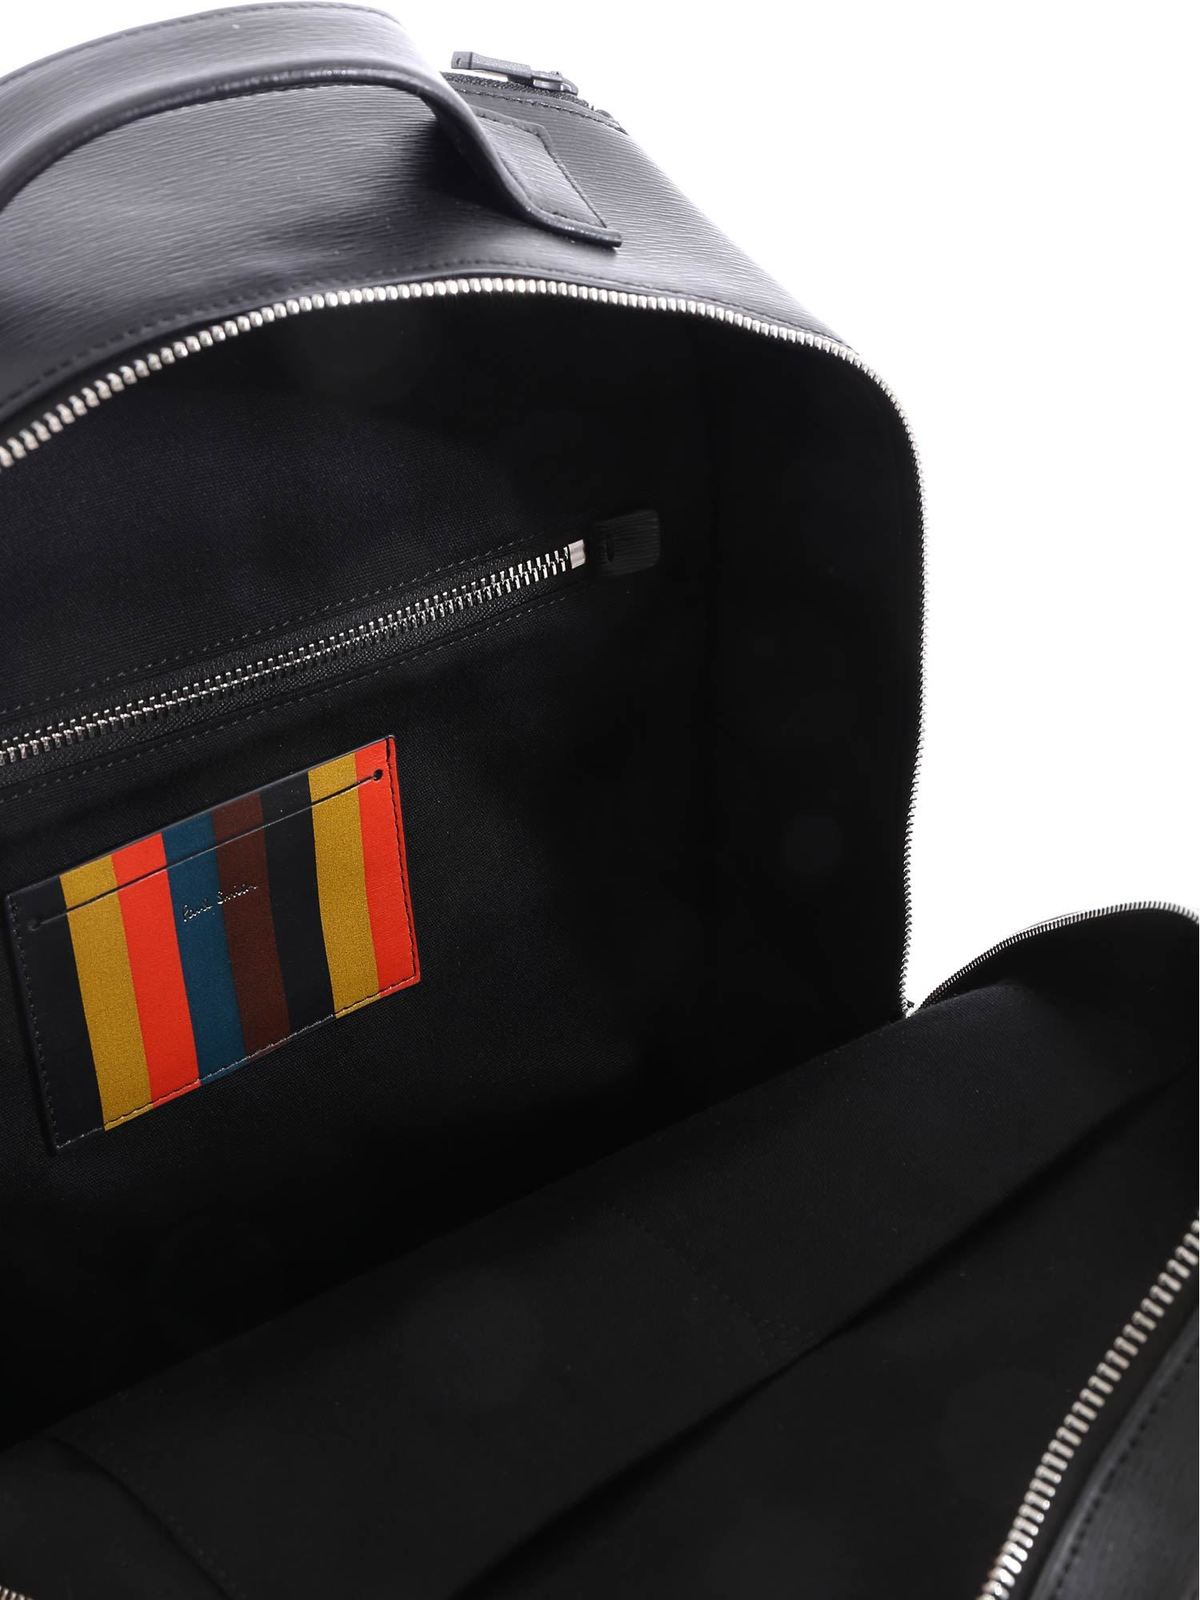 Pre-owned Paul Smith Canvas & Leather Multistripe Trim Travel Backpack  Retail £425